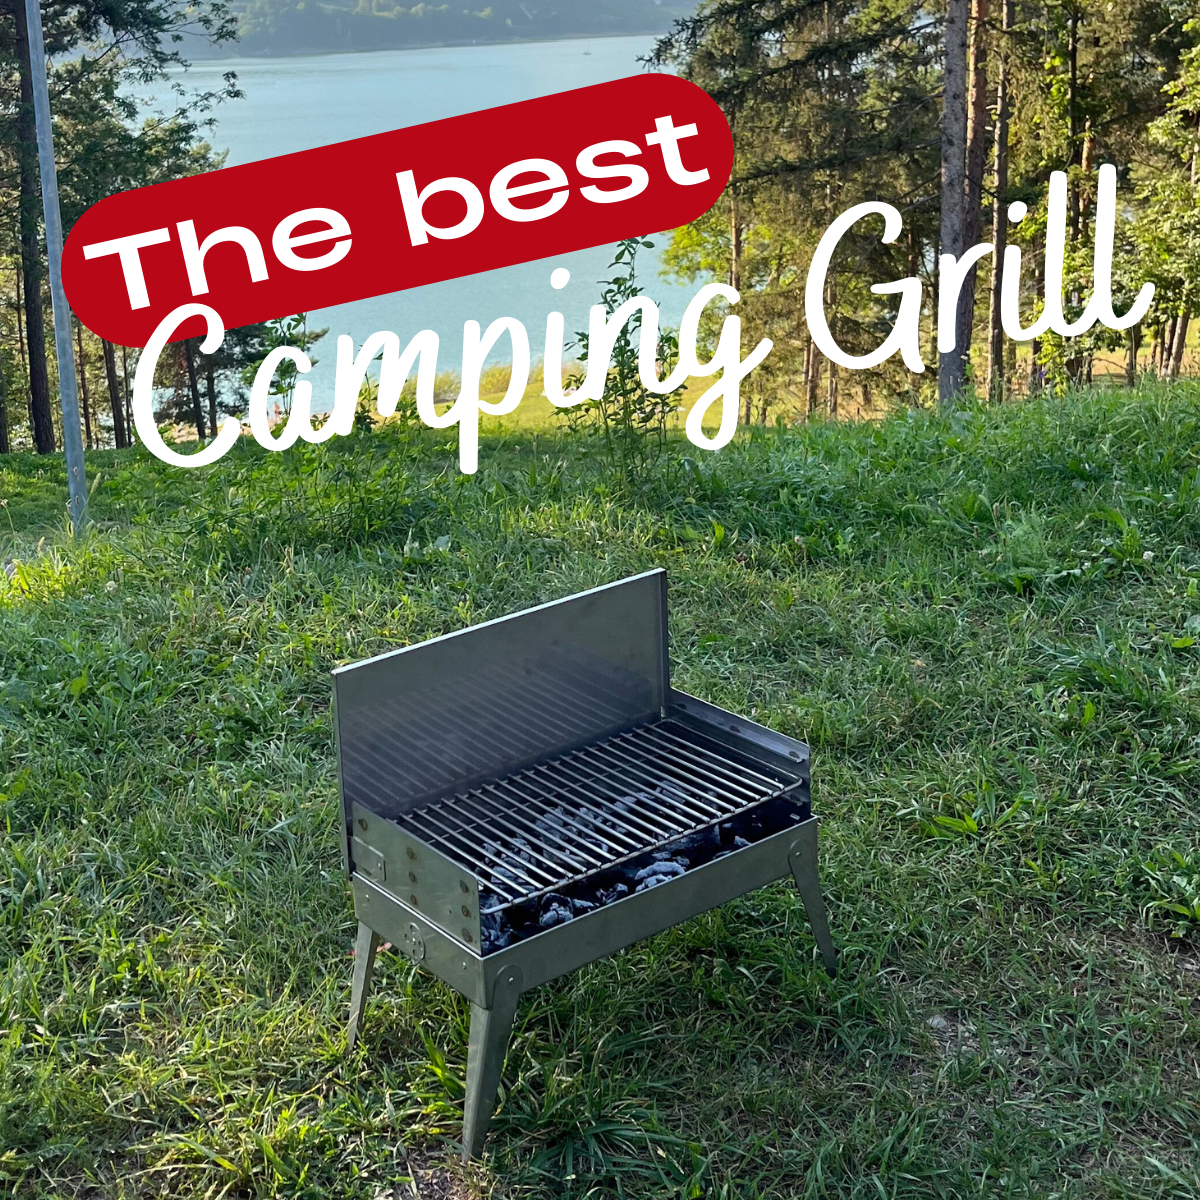 Taschengrill/ Campinggrill BBQ TO GO Tragbarer Grill Klappgrill